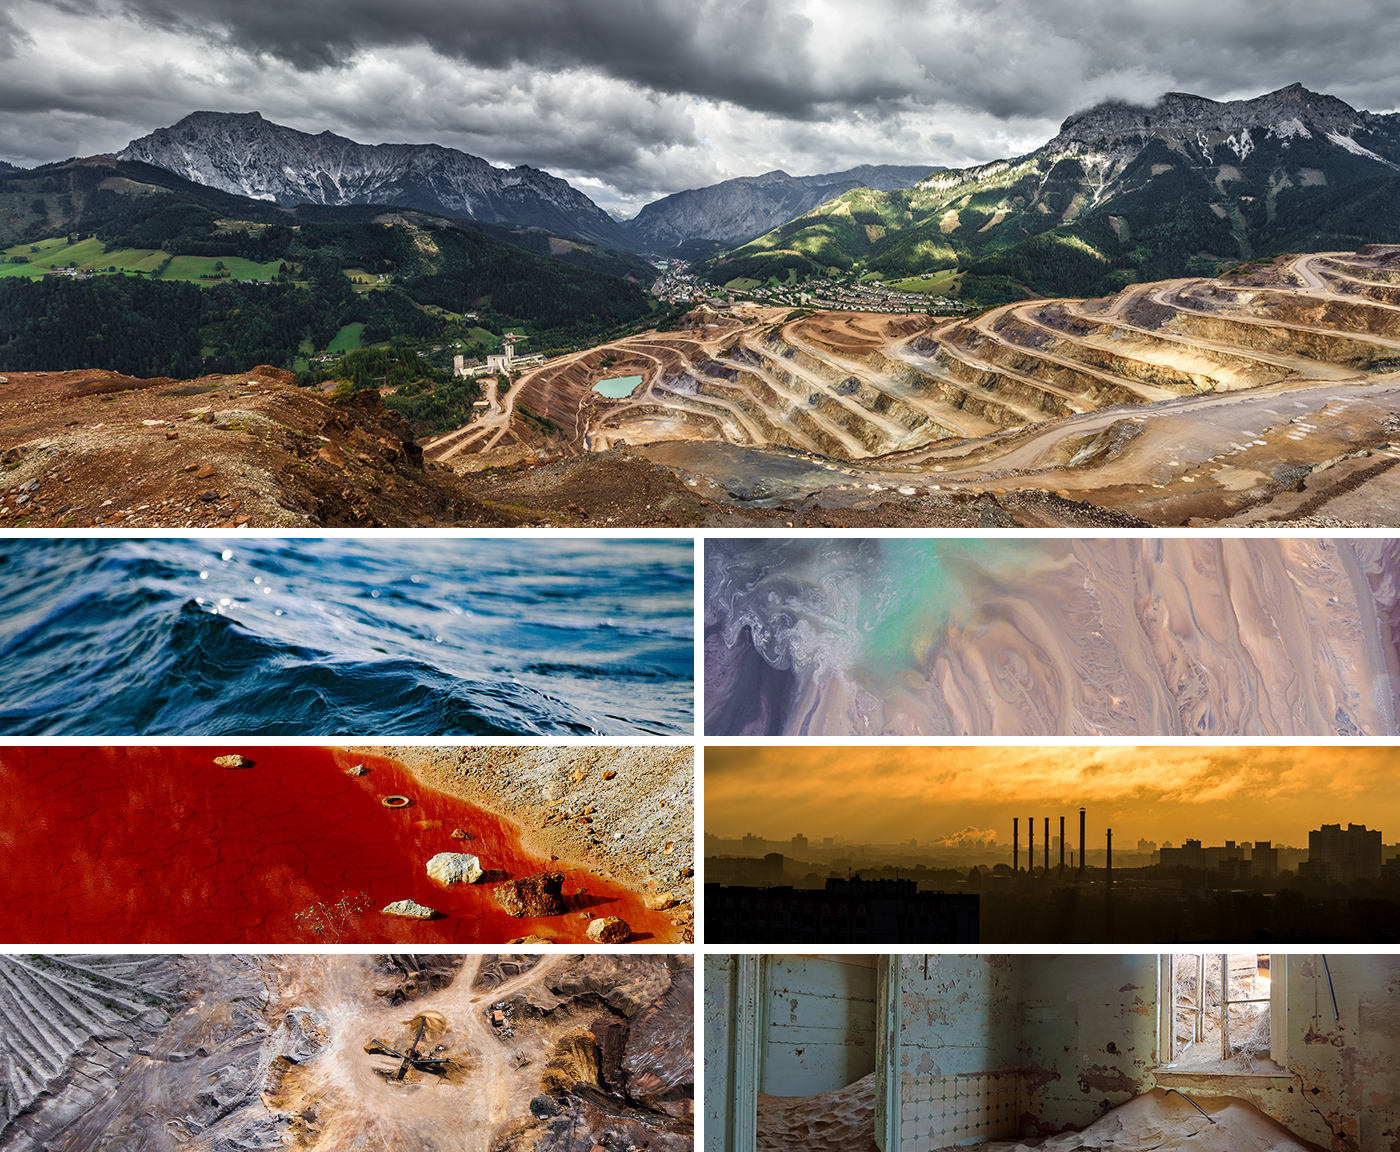 Multiple images that show the environmental devastation left behind from diamond mining.